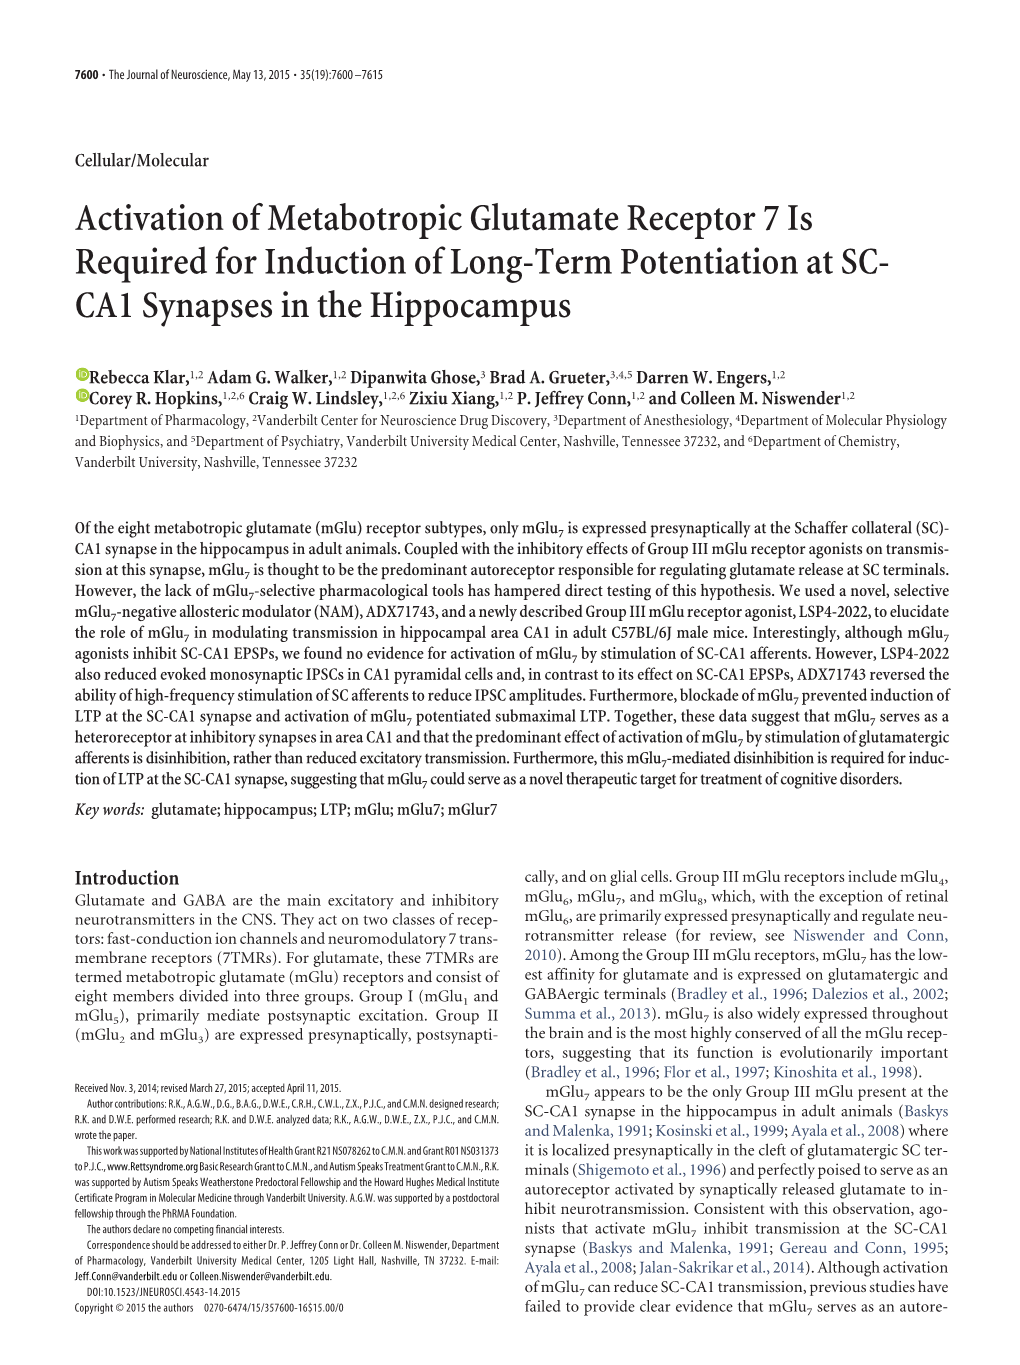 Activation of Metabotropic Glutamate Receptor 7 Is Required for Induction of Long-Term Potentiation at SC- CA1 Synapses in the Hippocampus